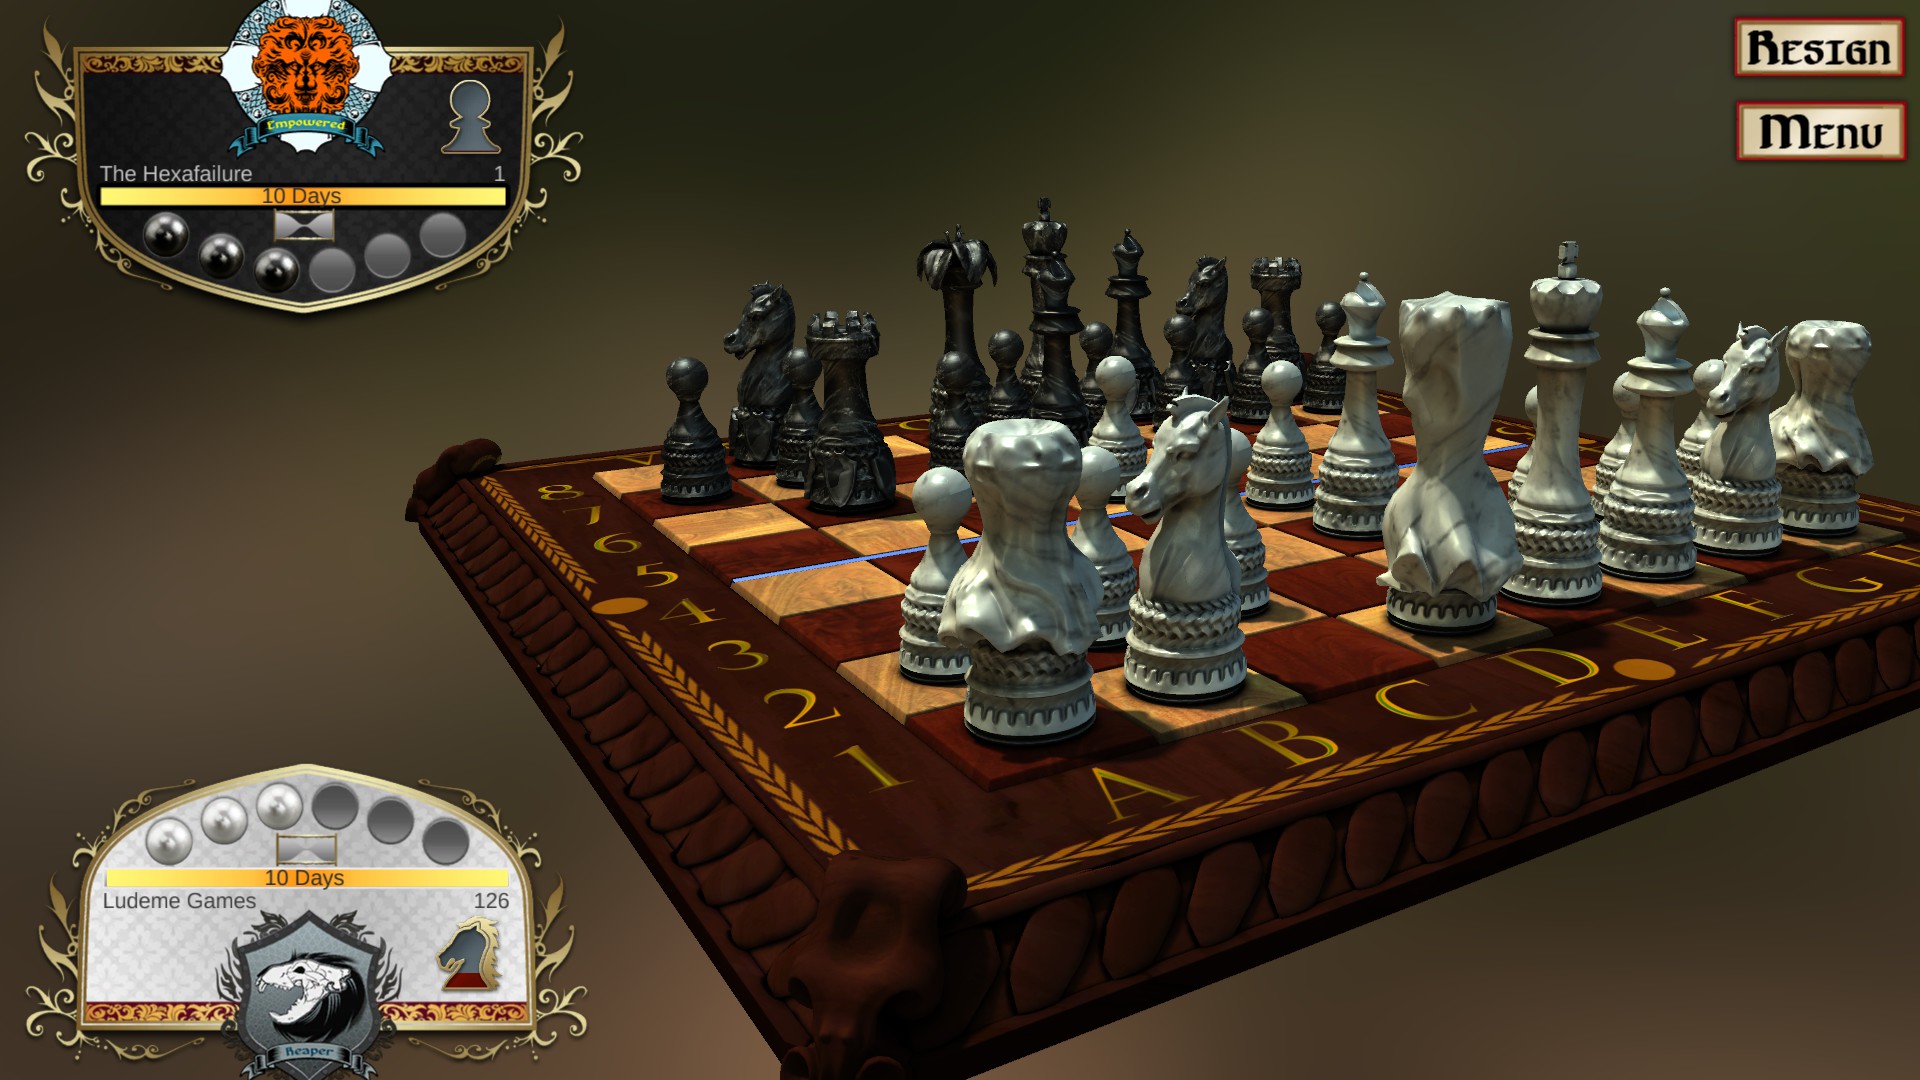 Battle Chess Game Of Kings Free Download Full Version